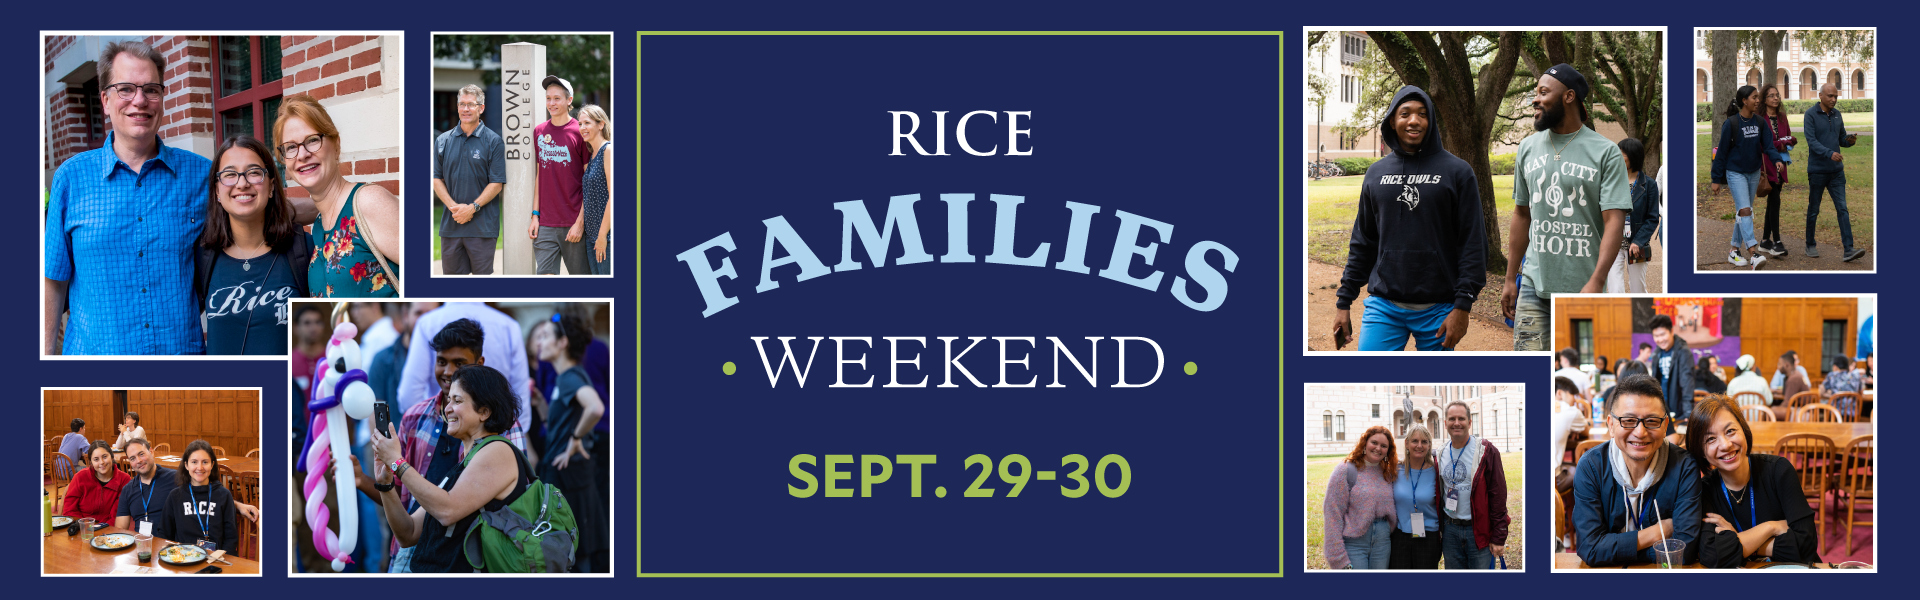 Rice Families Weekend Save the Date! Sept. 29-30